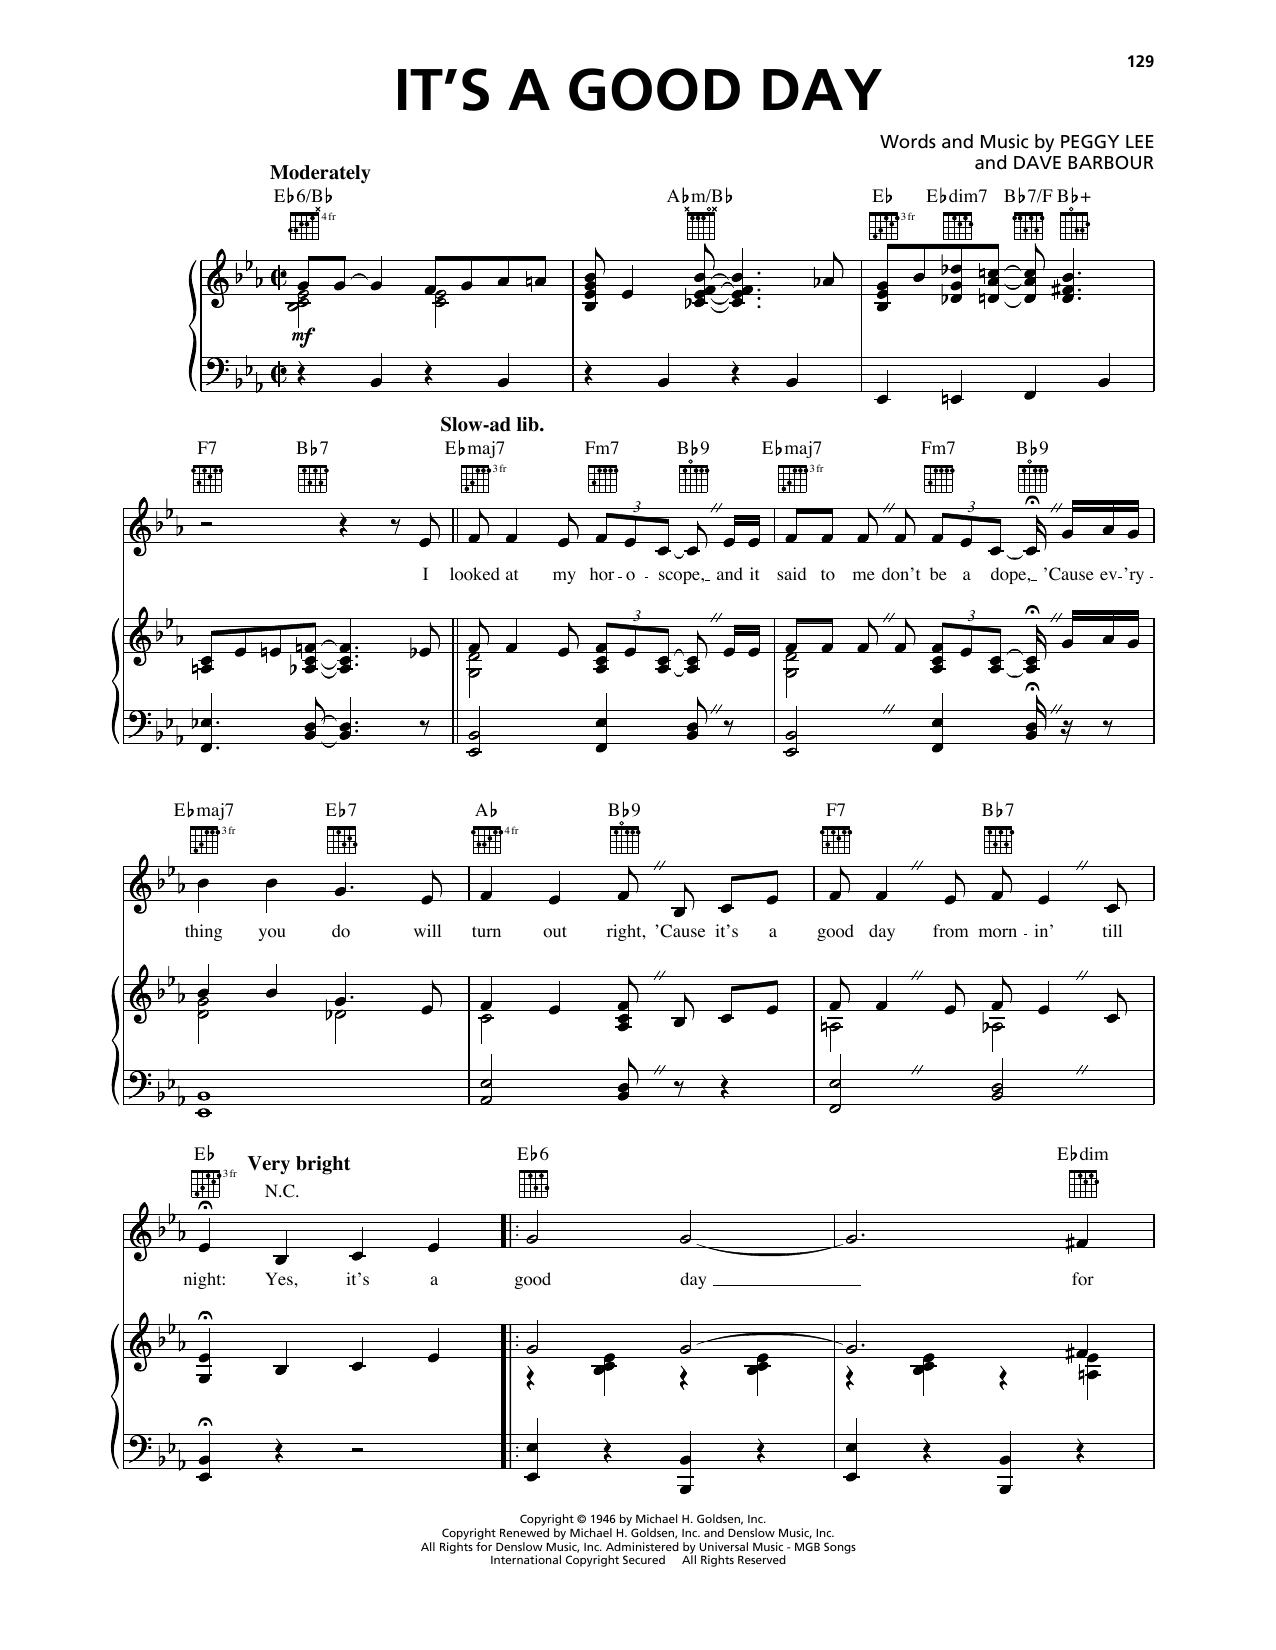 Download Peggy Lee It's A Good Day Sheet Music